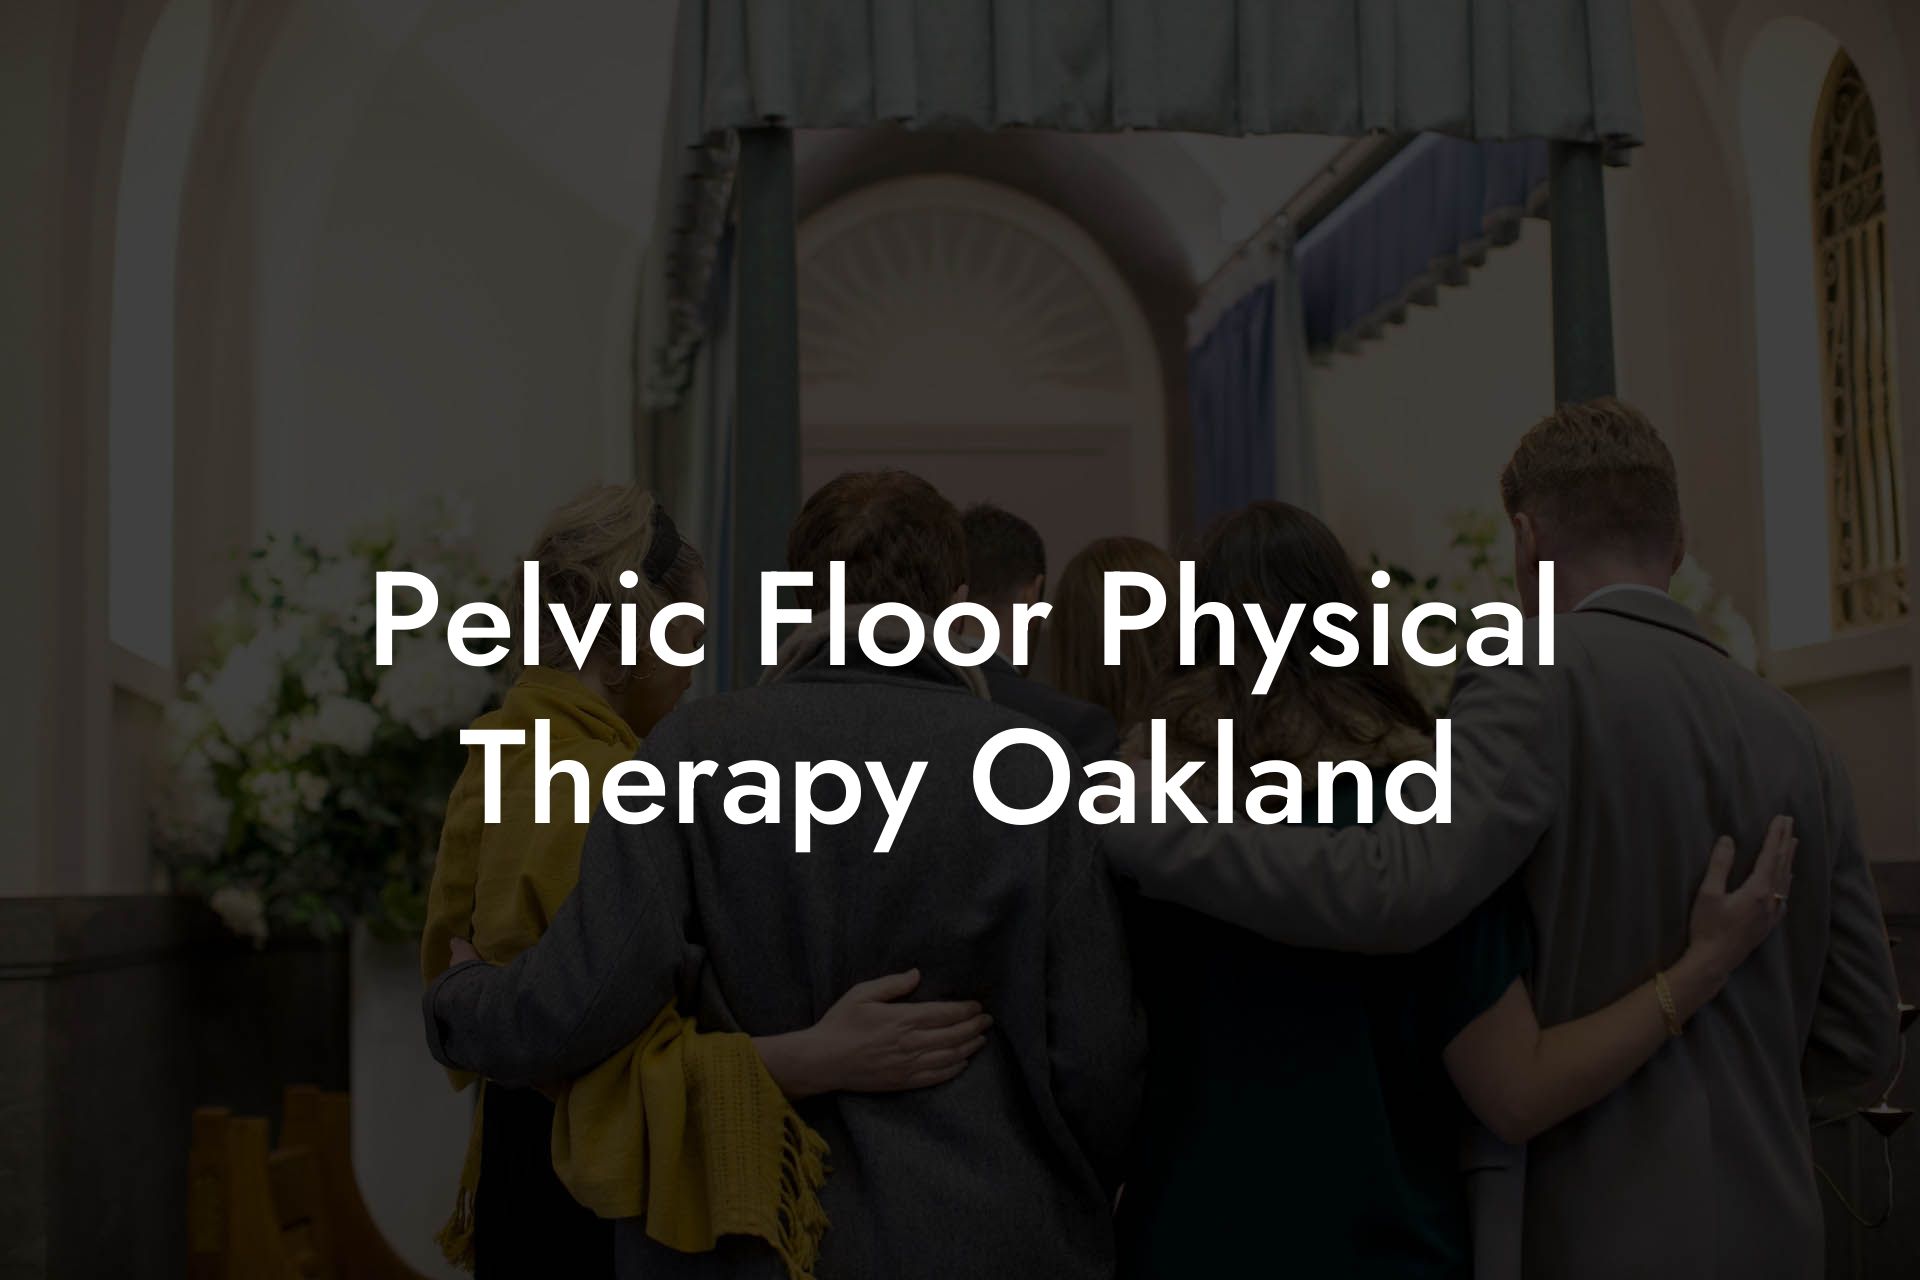 Pelvic Floor Physical Therapy Oakland